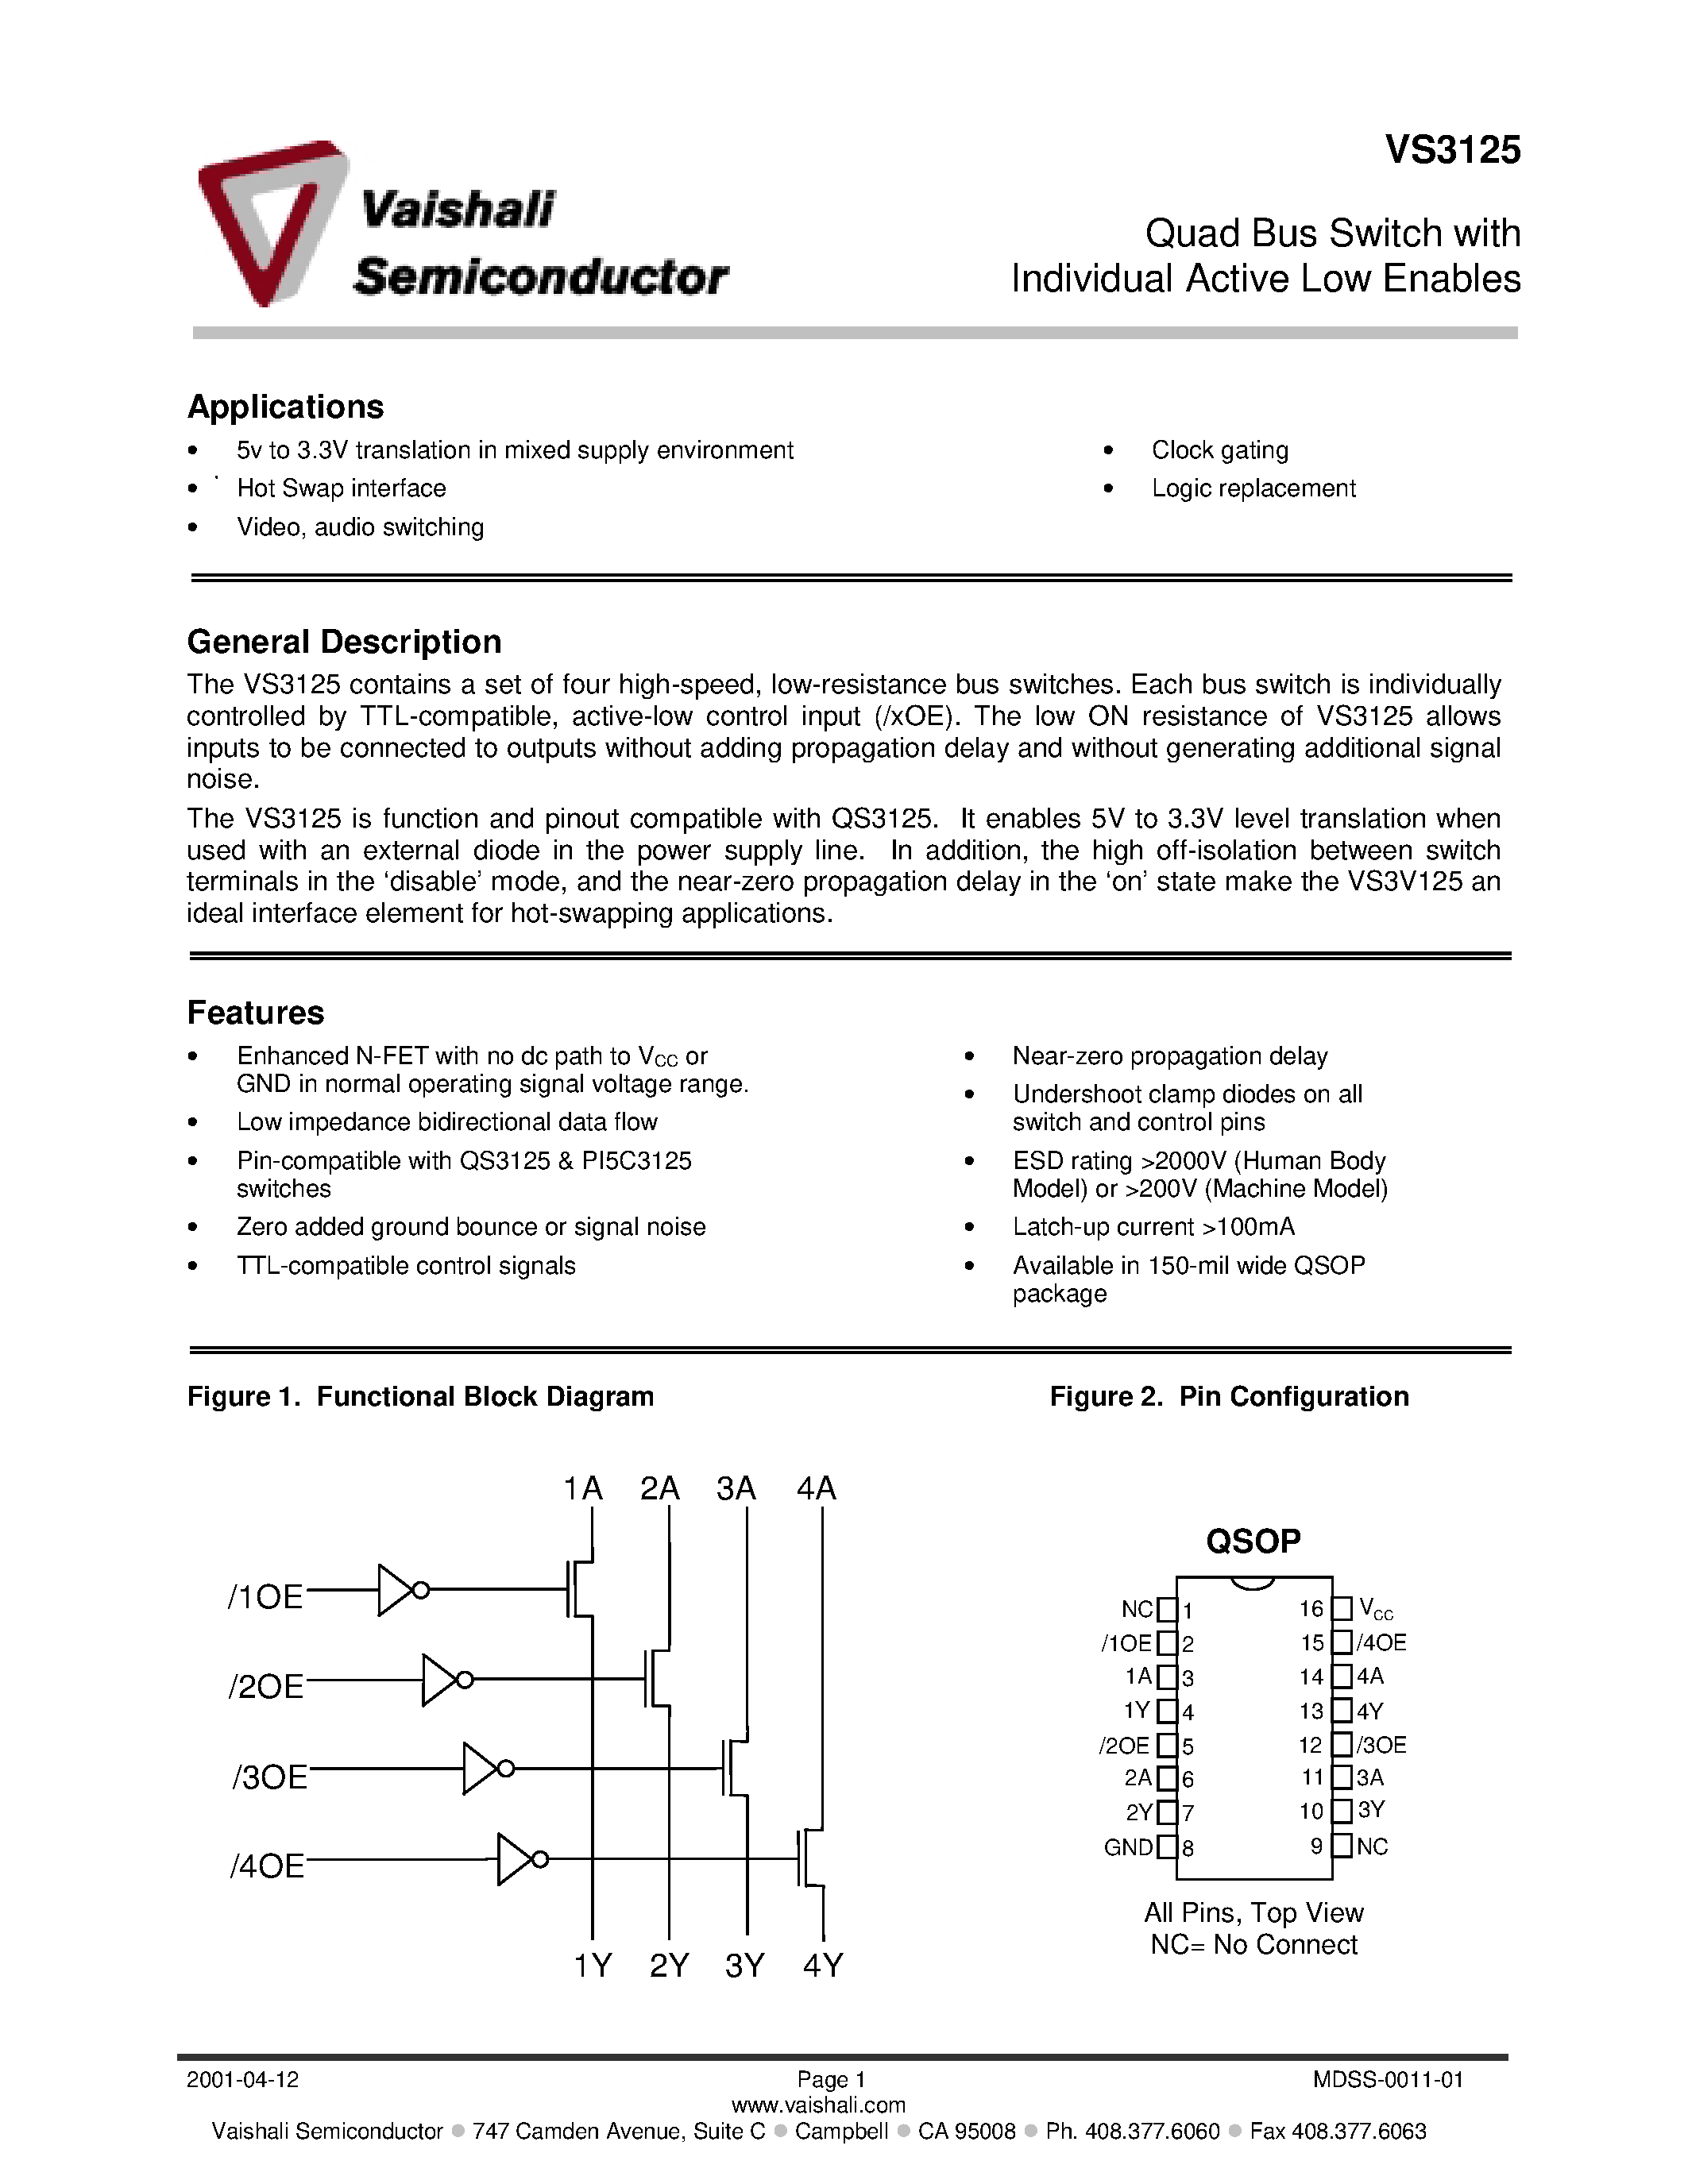 Datasheet VS3125 - Quad Bus Switch with Individual Active Low Enables page 1